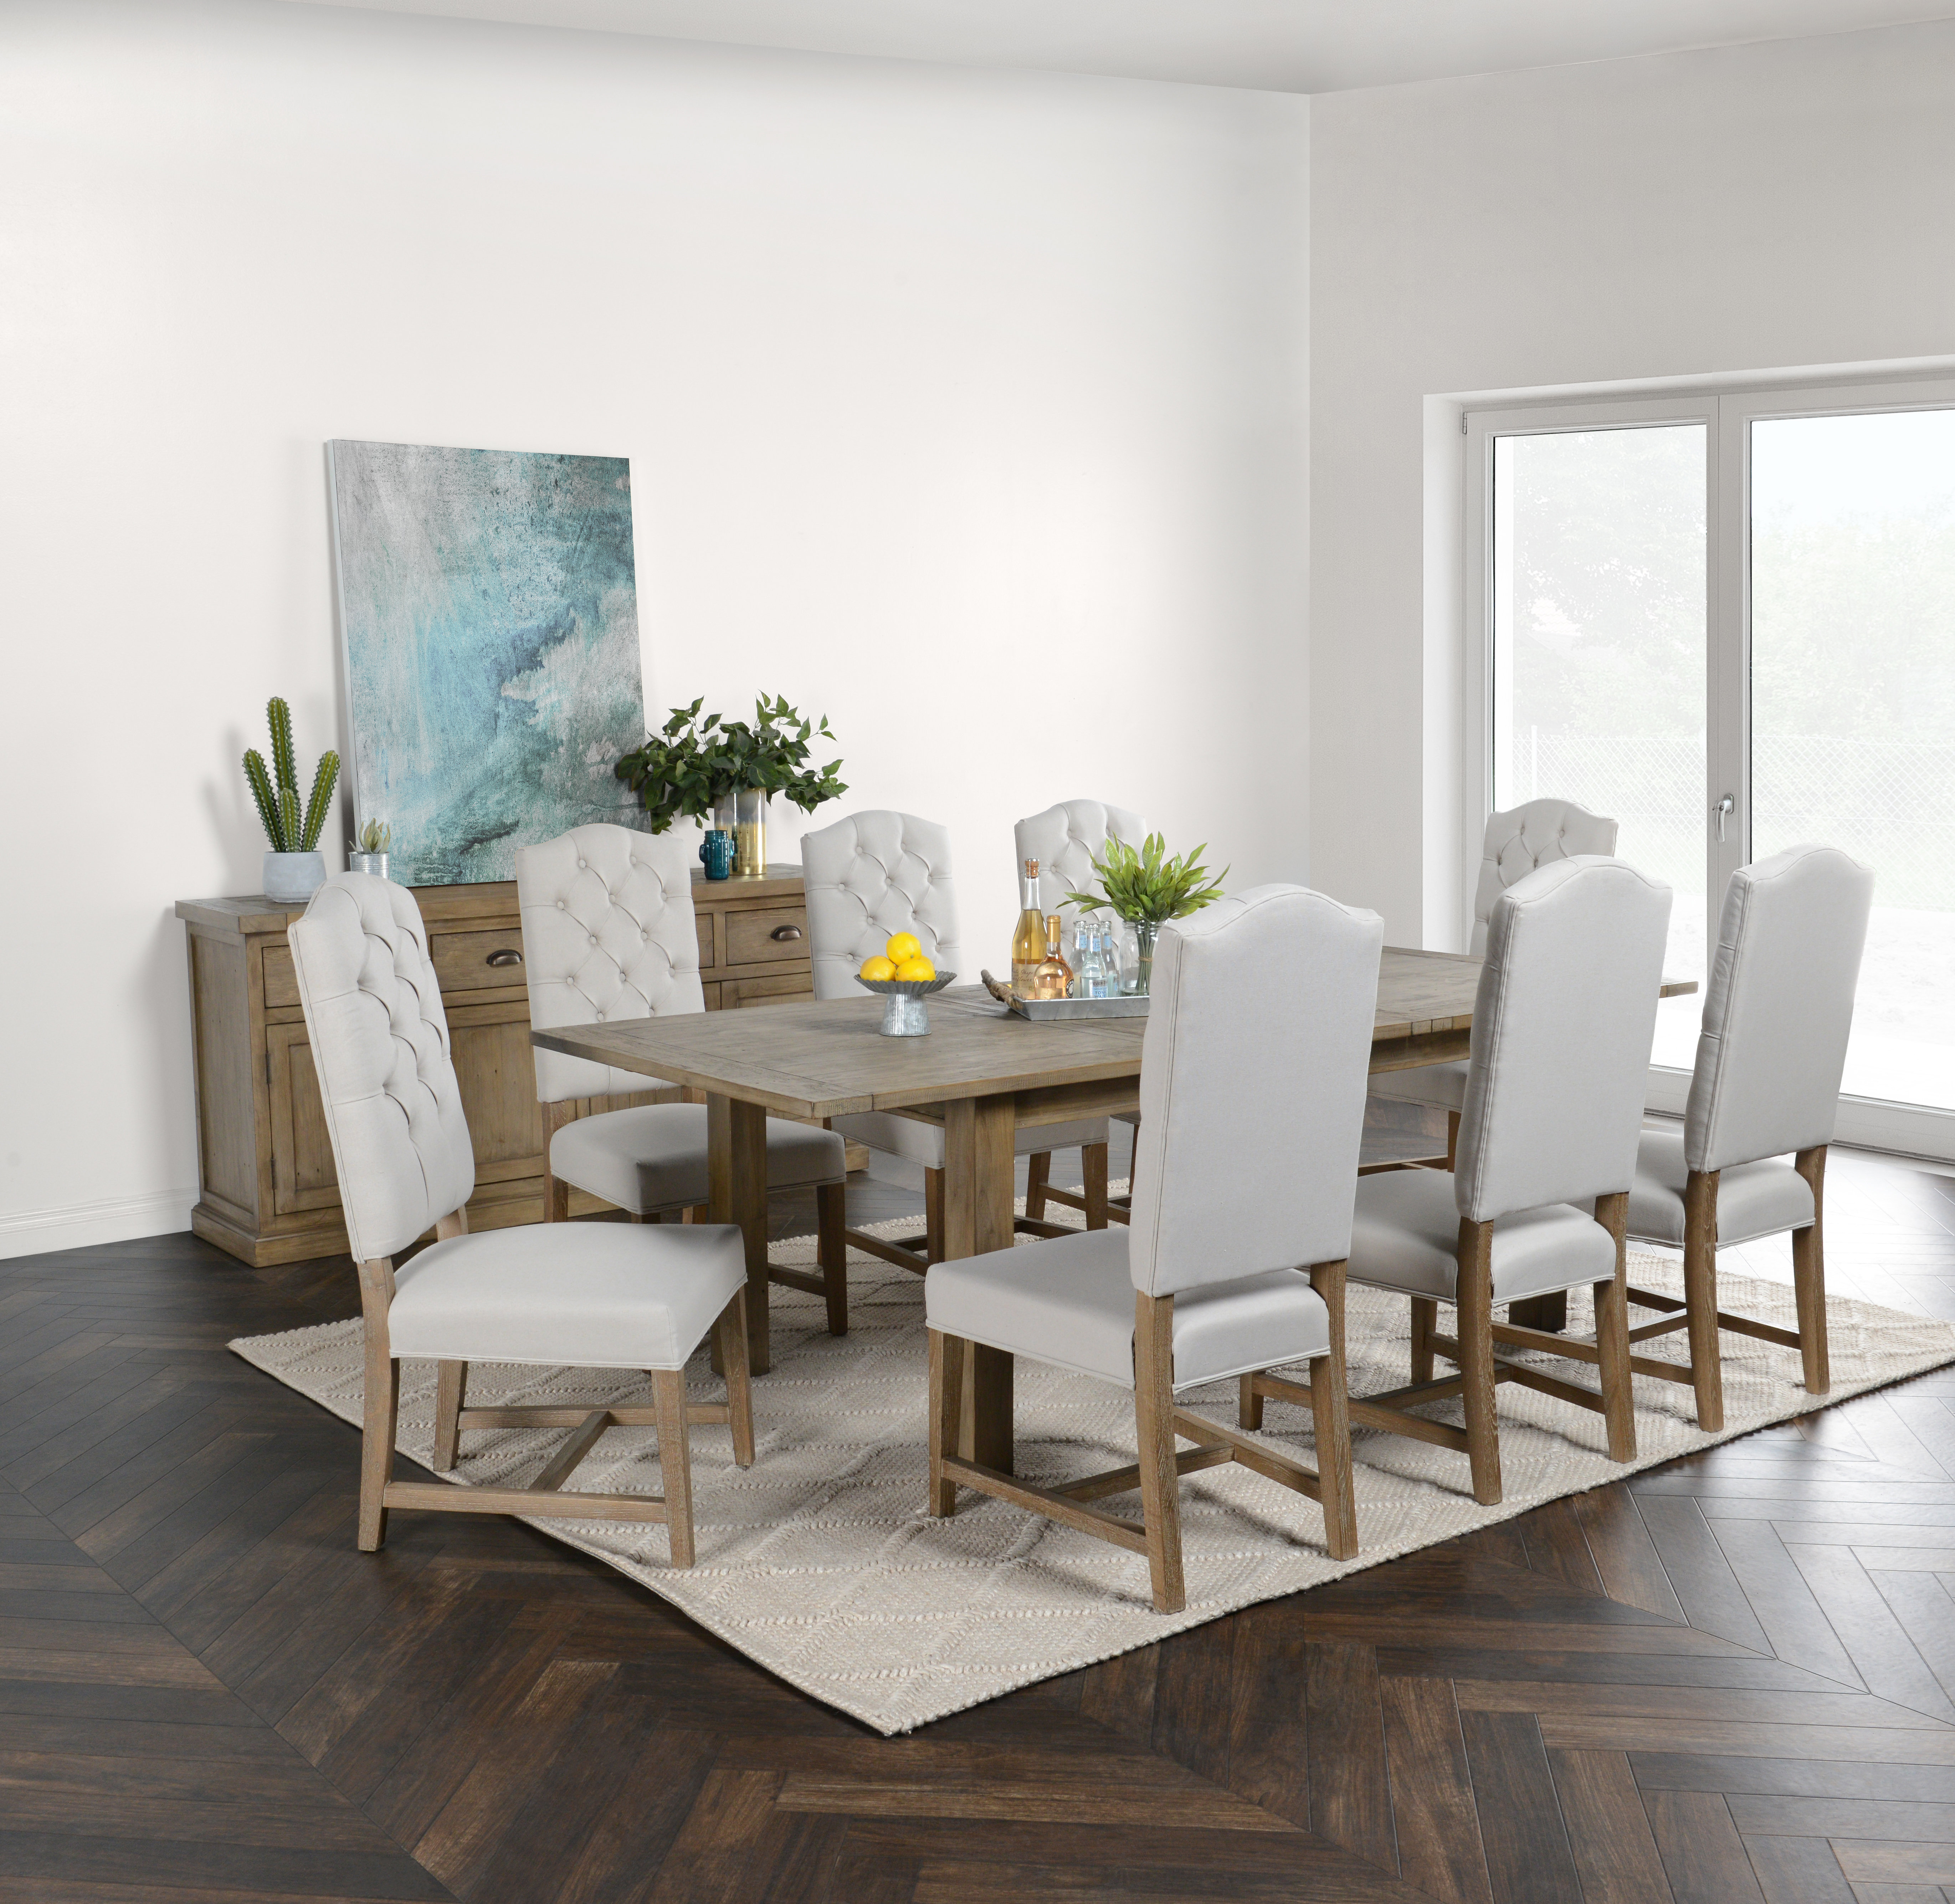 Egremt Driftwood Extendable Solid Wood Dining Table Reviews